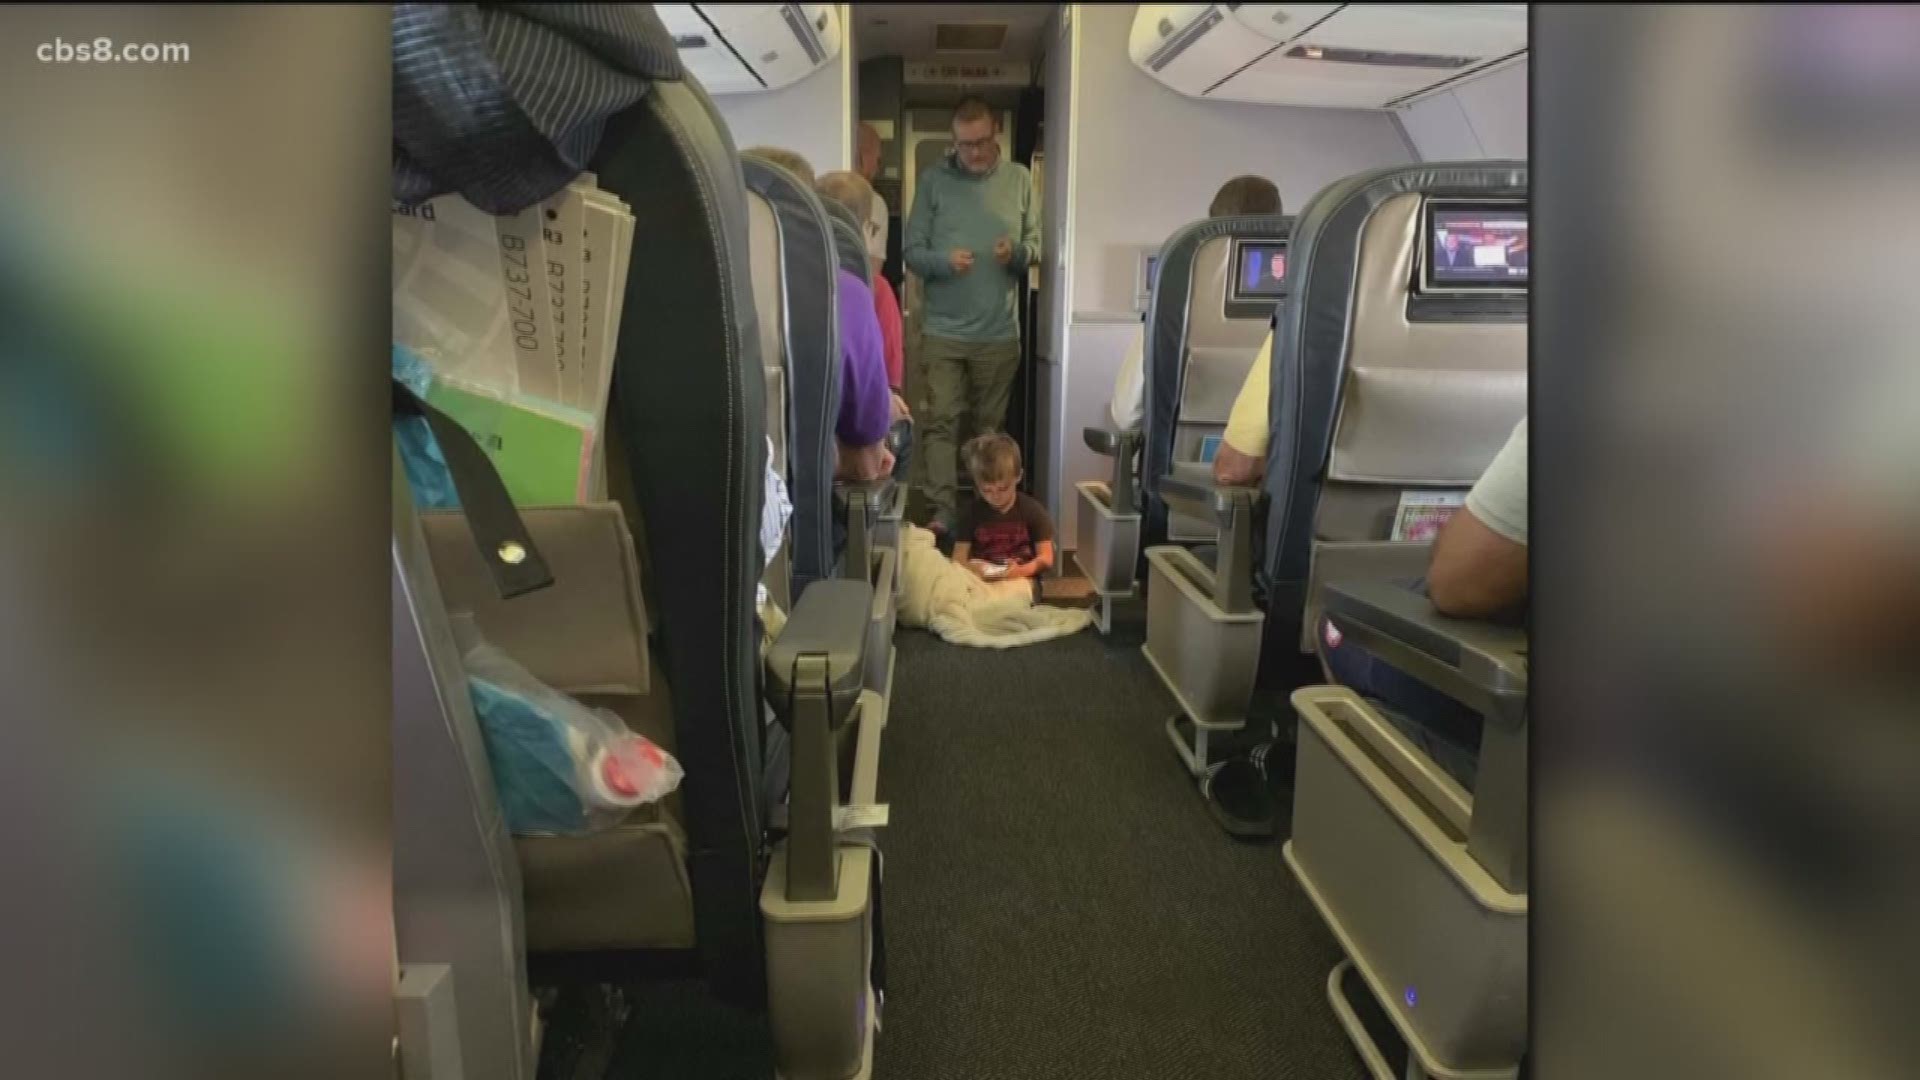 Most parents know the stress of traveling with little children, but one family has shared their experience on a United Airlines flight after the crew stepped in to help their young son who is autistic and was having a difficult time.